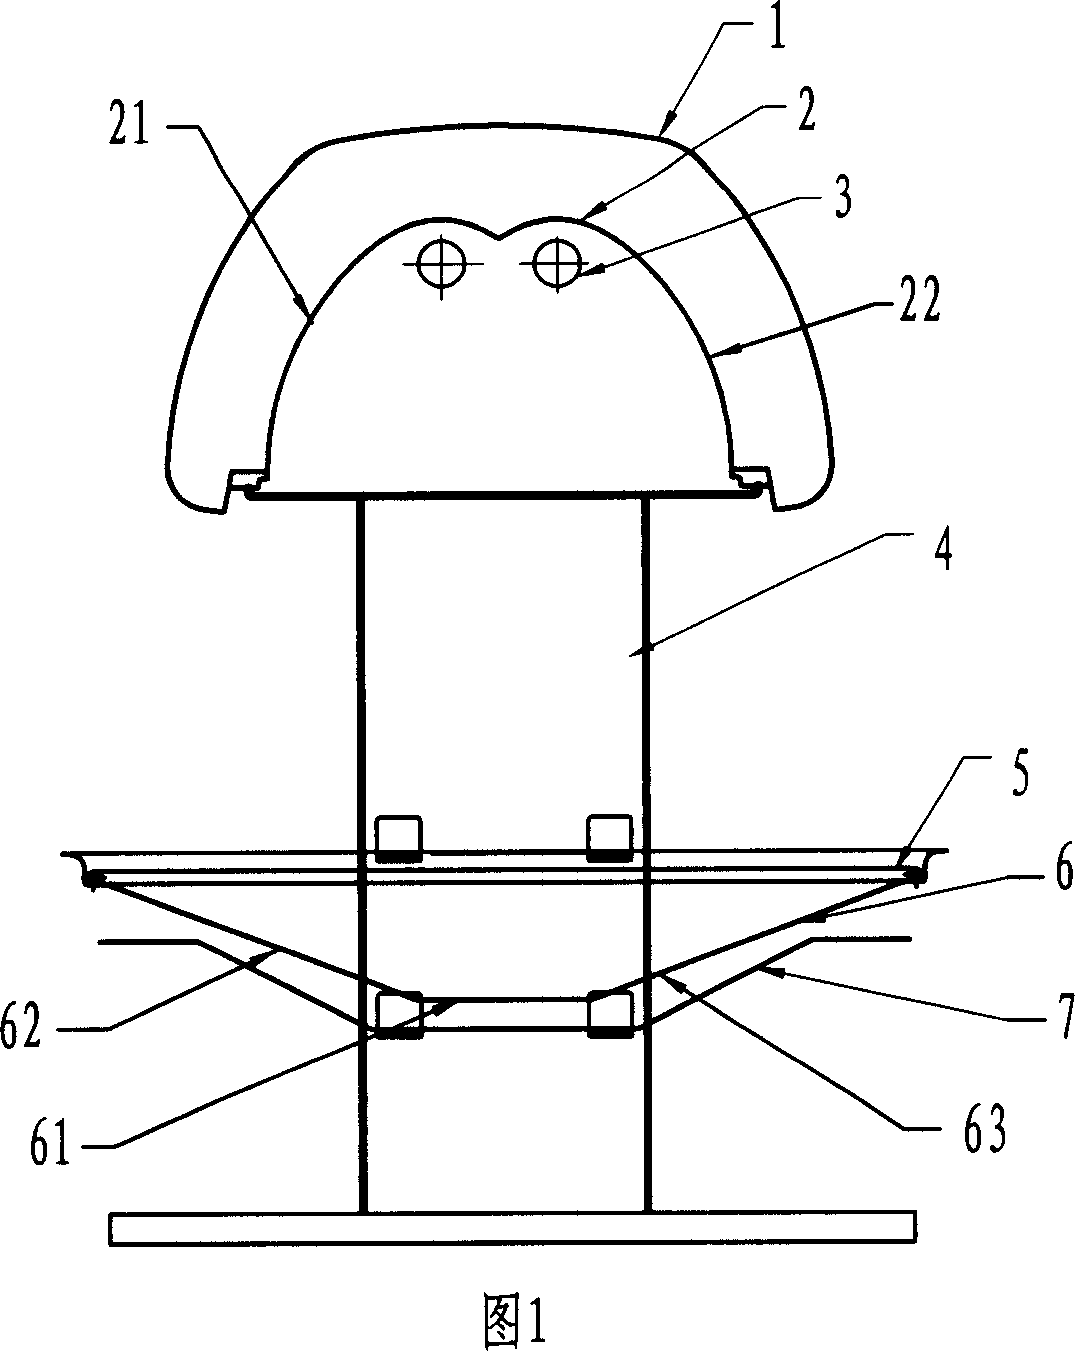 Electric heating barbecue apparatus